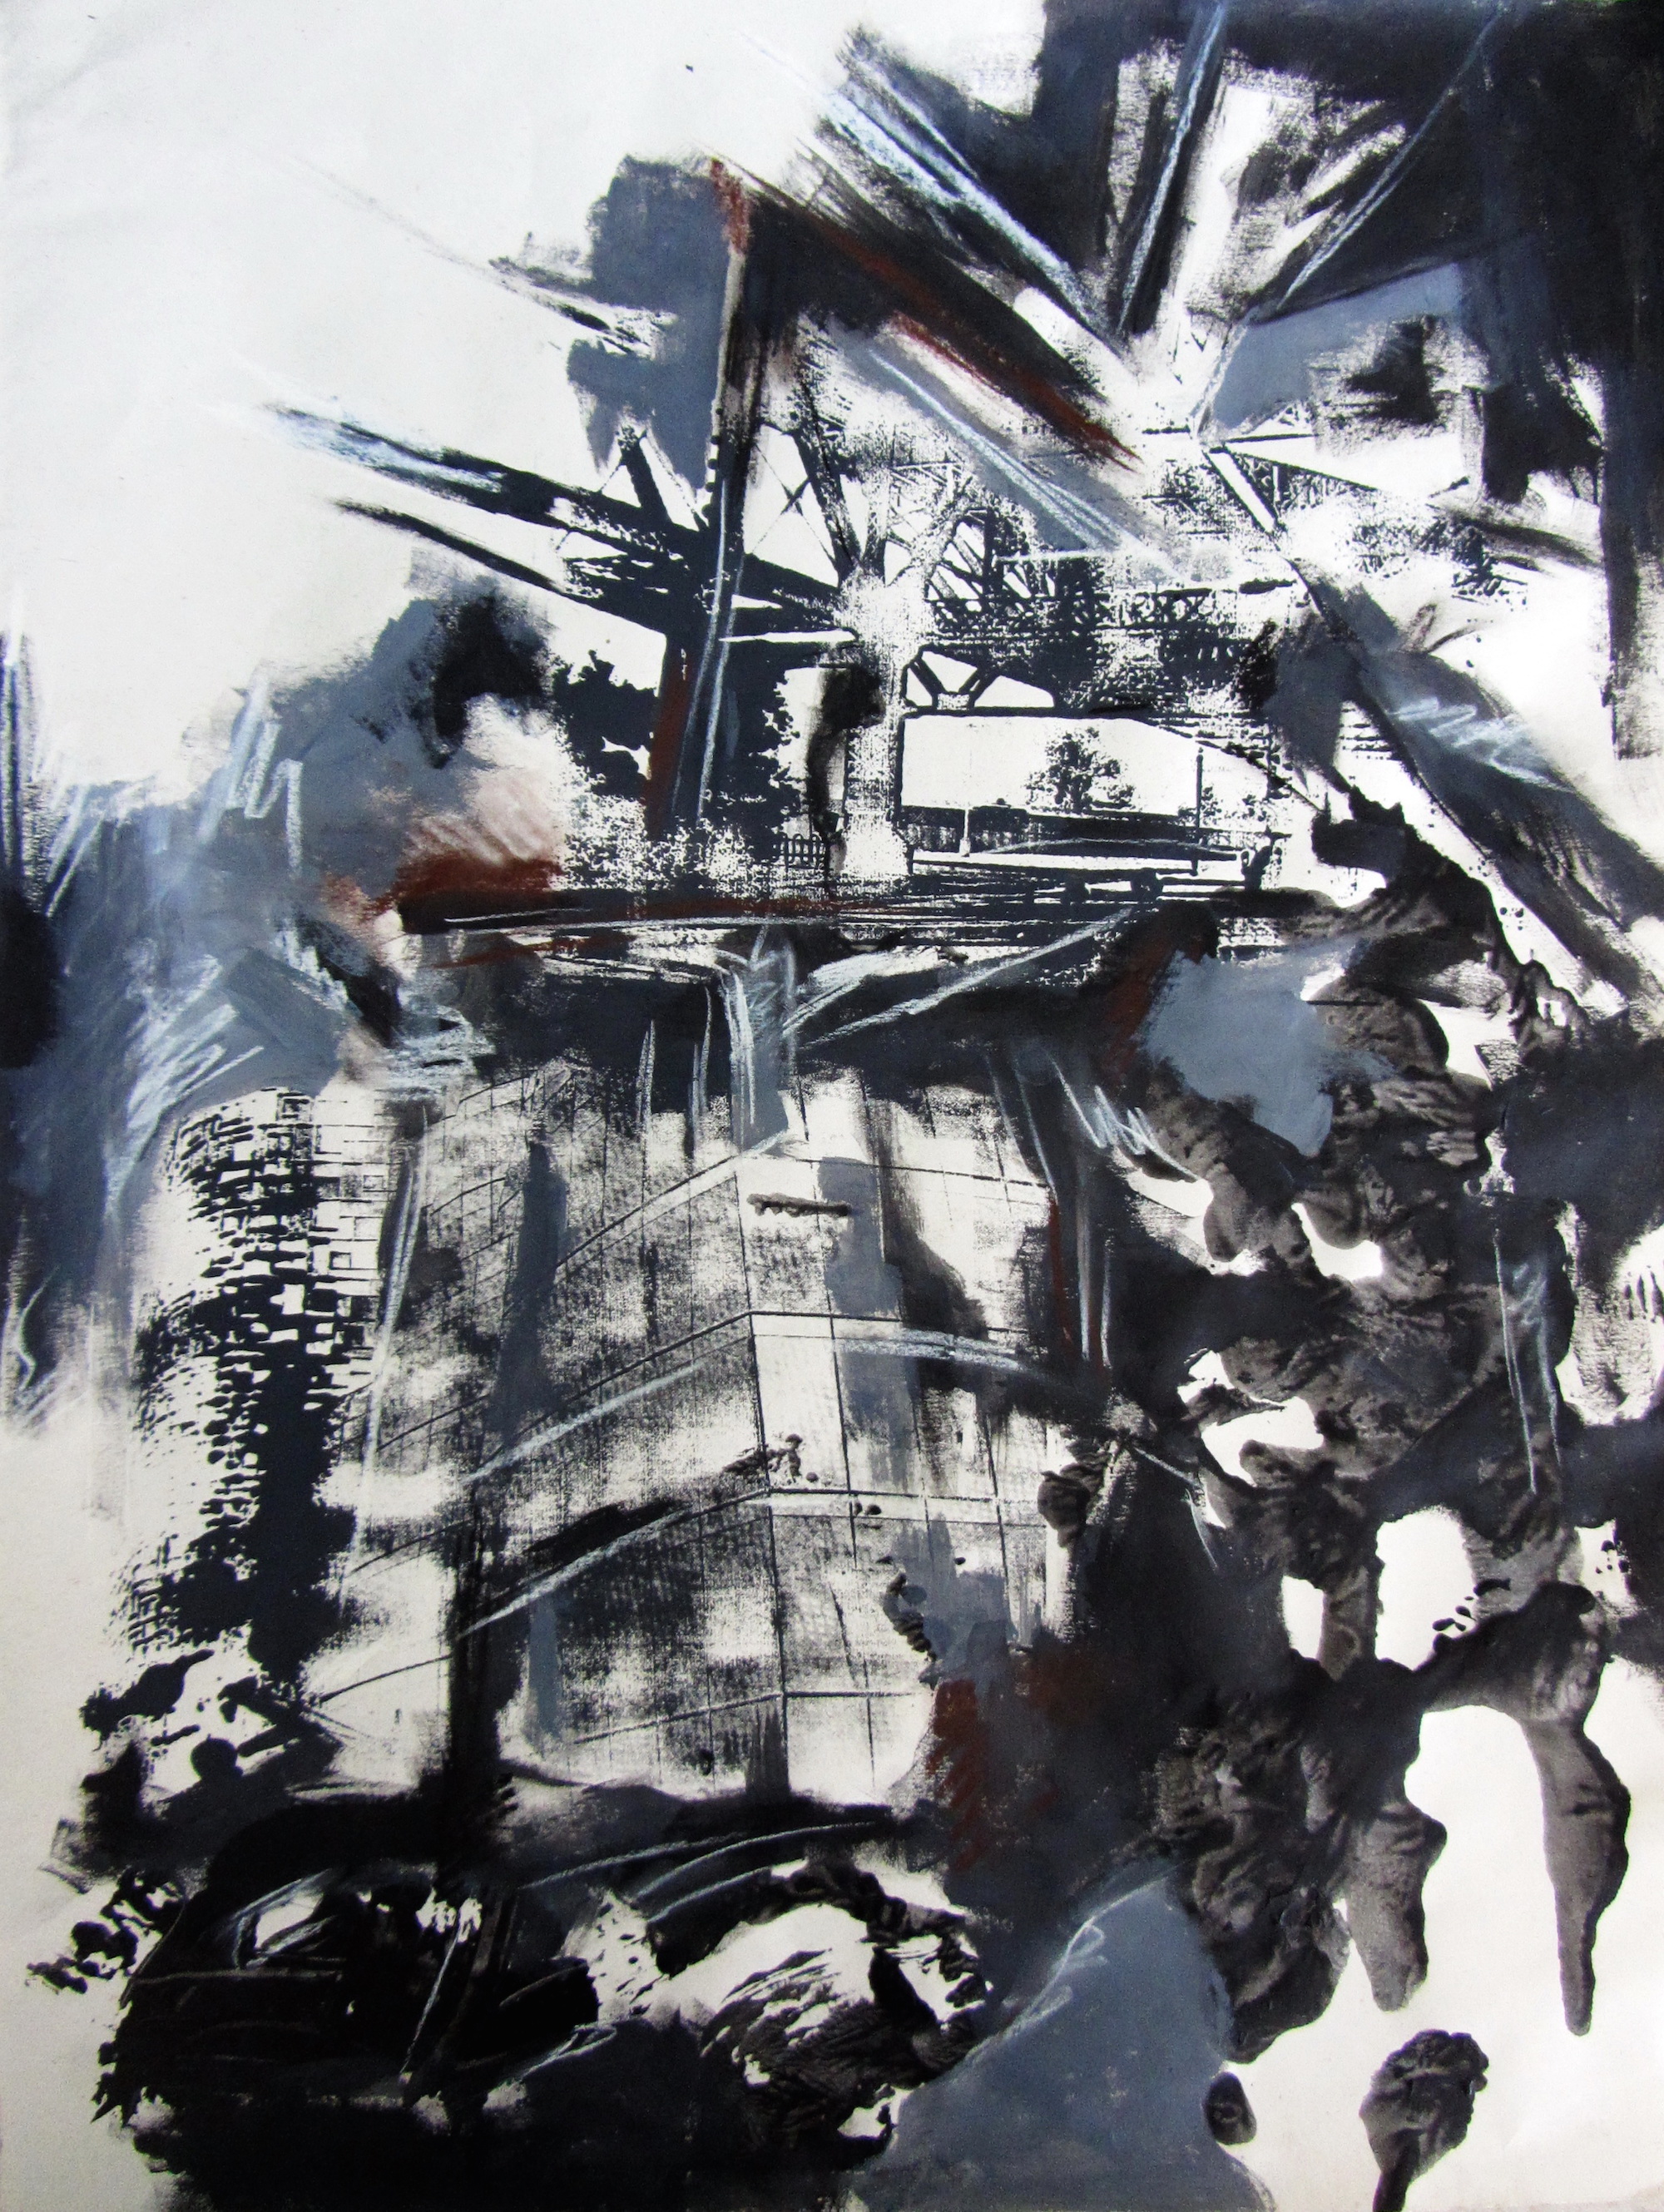 Approaching the city #4, mixed media on paper, 24x17 inches, 2011